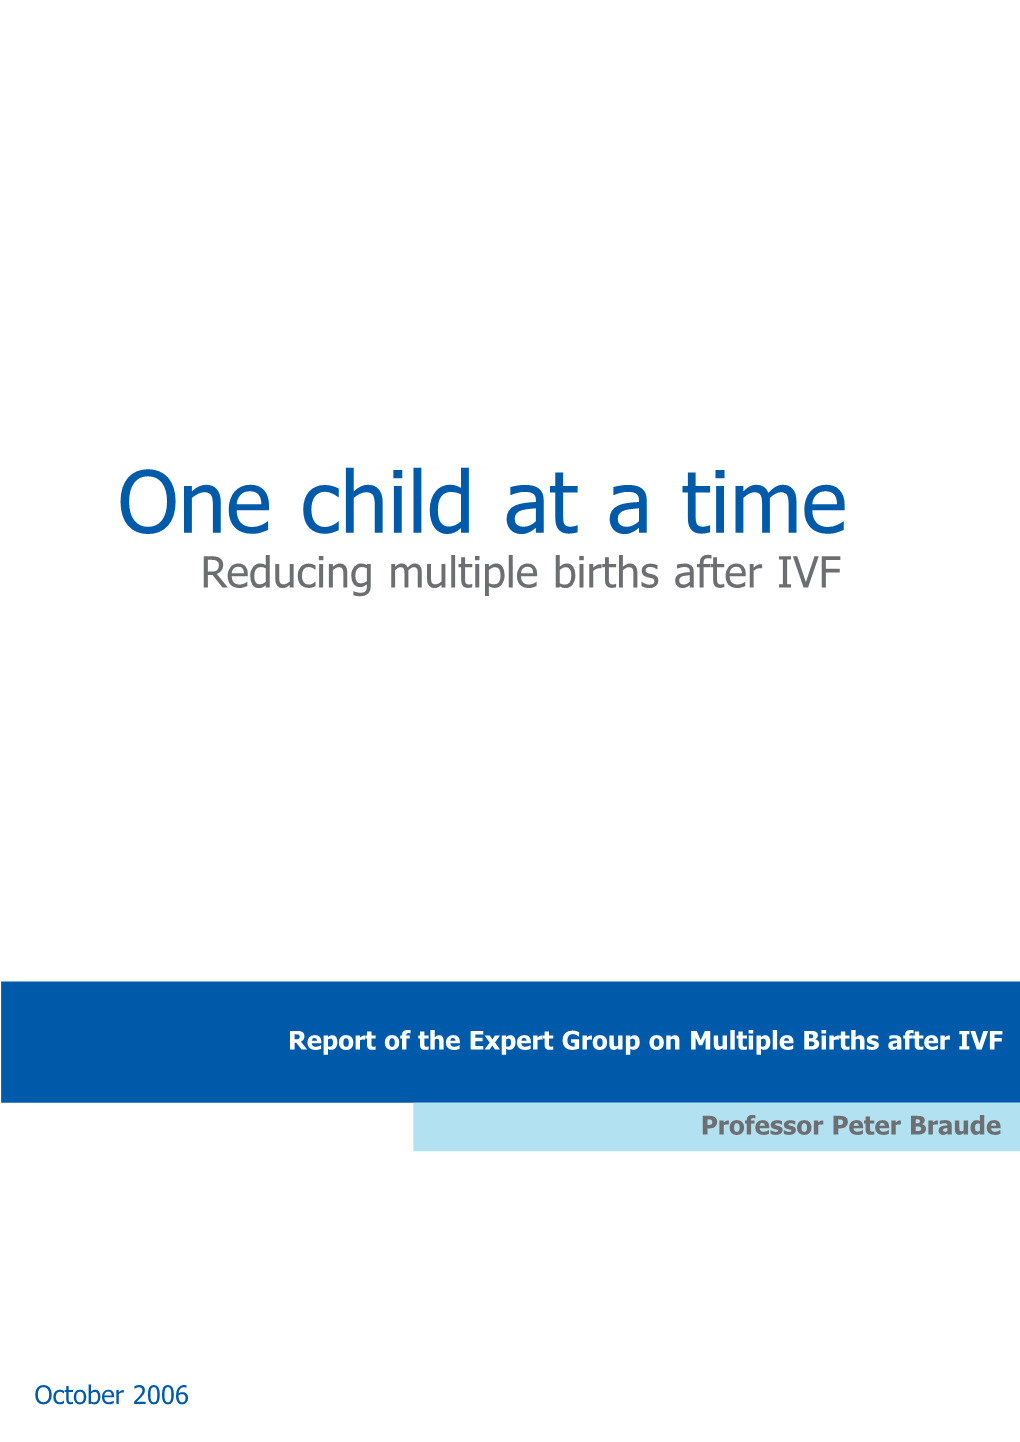 'One Child at a Time' Report